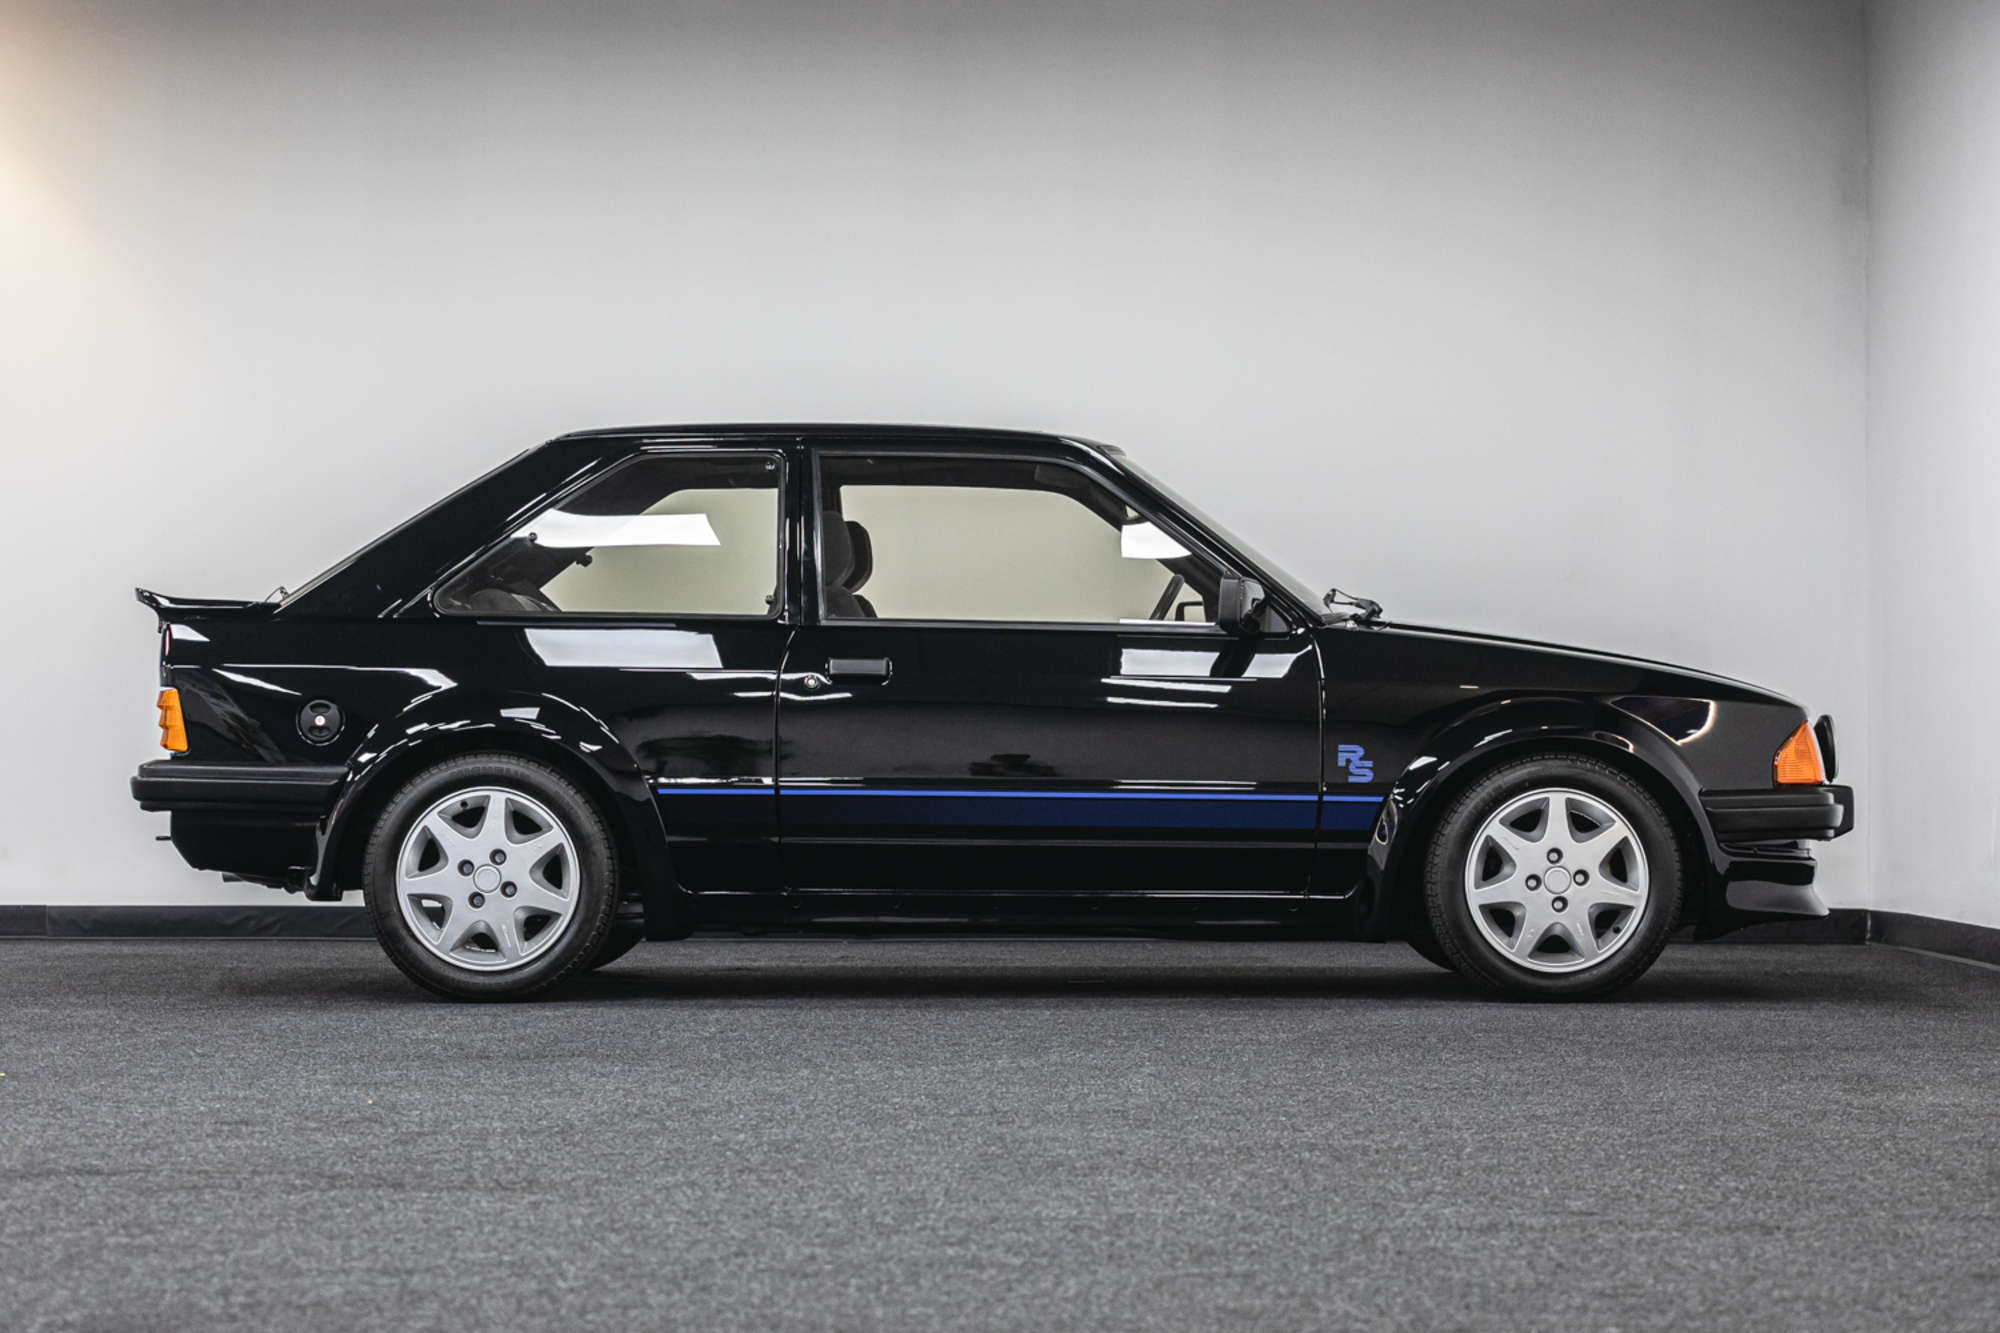 People’s Princess, people’s sports car: Diana’s Ford Escort RS Turbo heads to auction